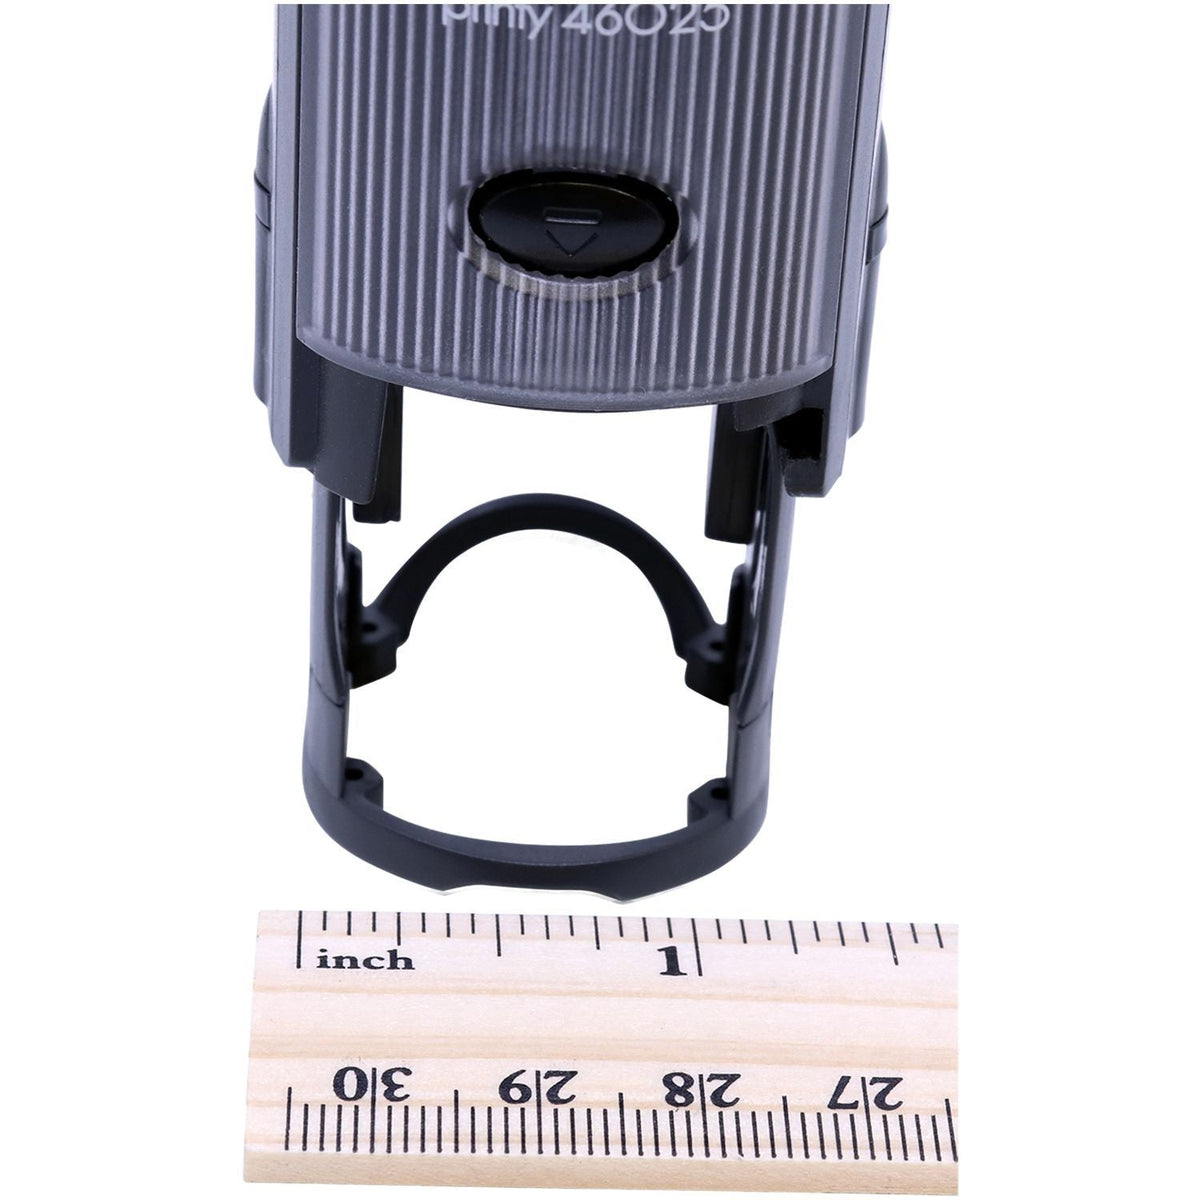 Measurment of Self-Inking Round Double Star Stamp with Ruler